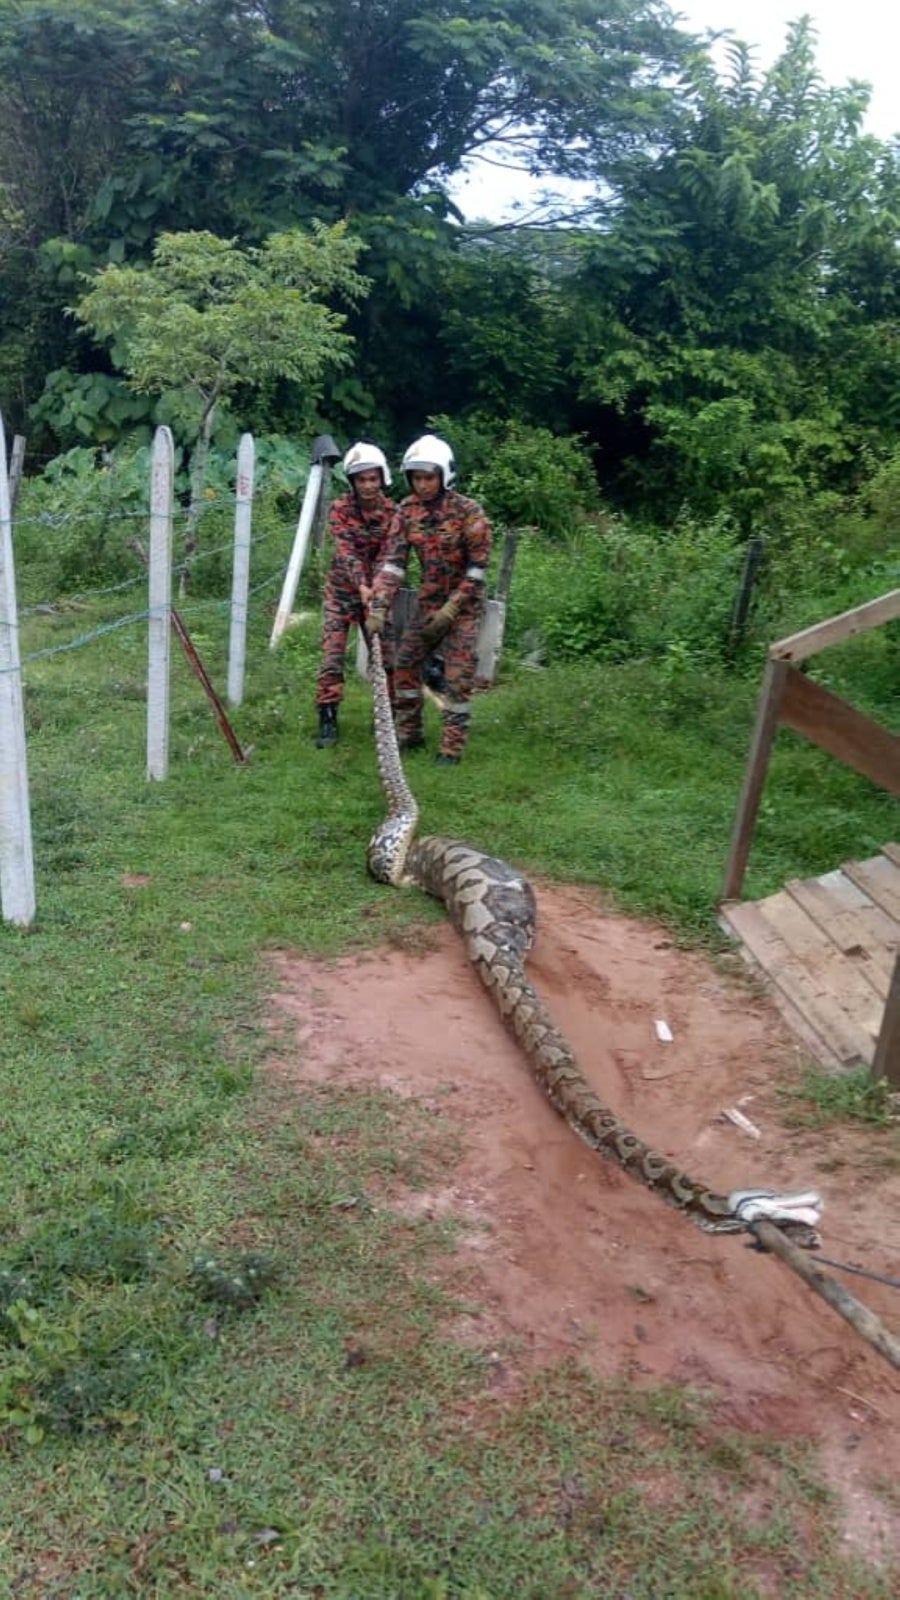 Firemen Captured 80 Kg Python In Perak After It Swallowed Goat And Cat - World Of Buzz 1